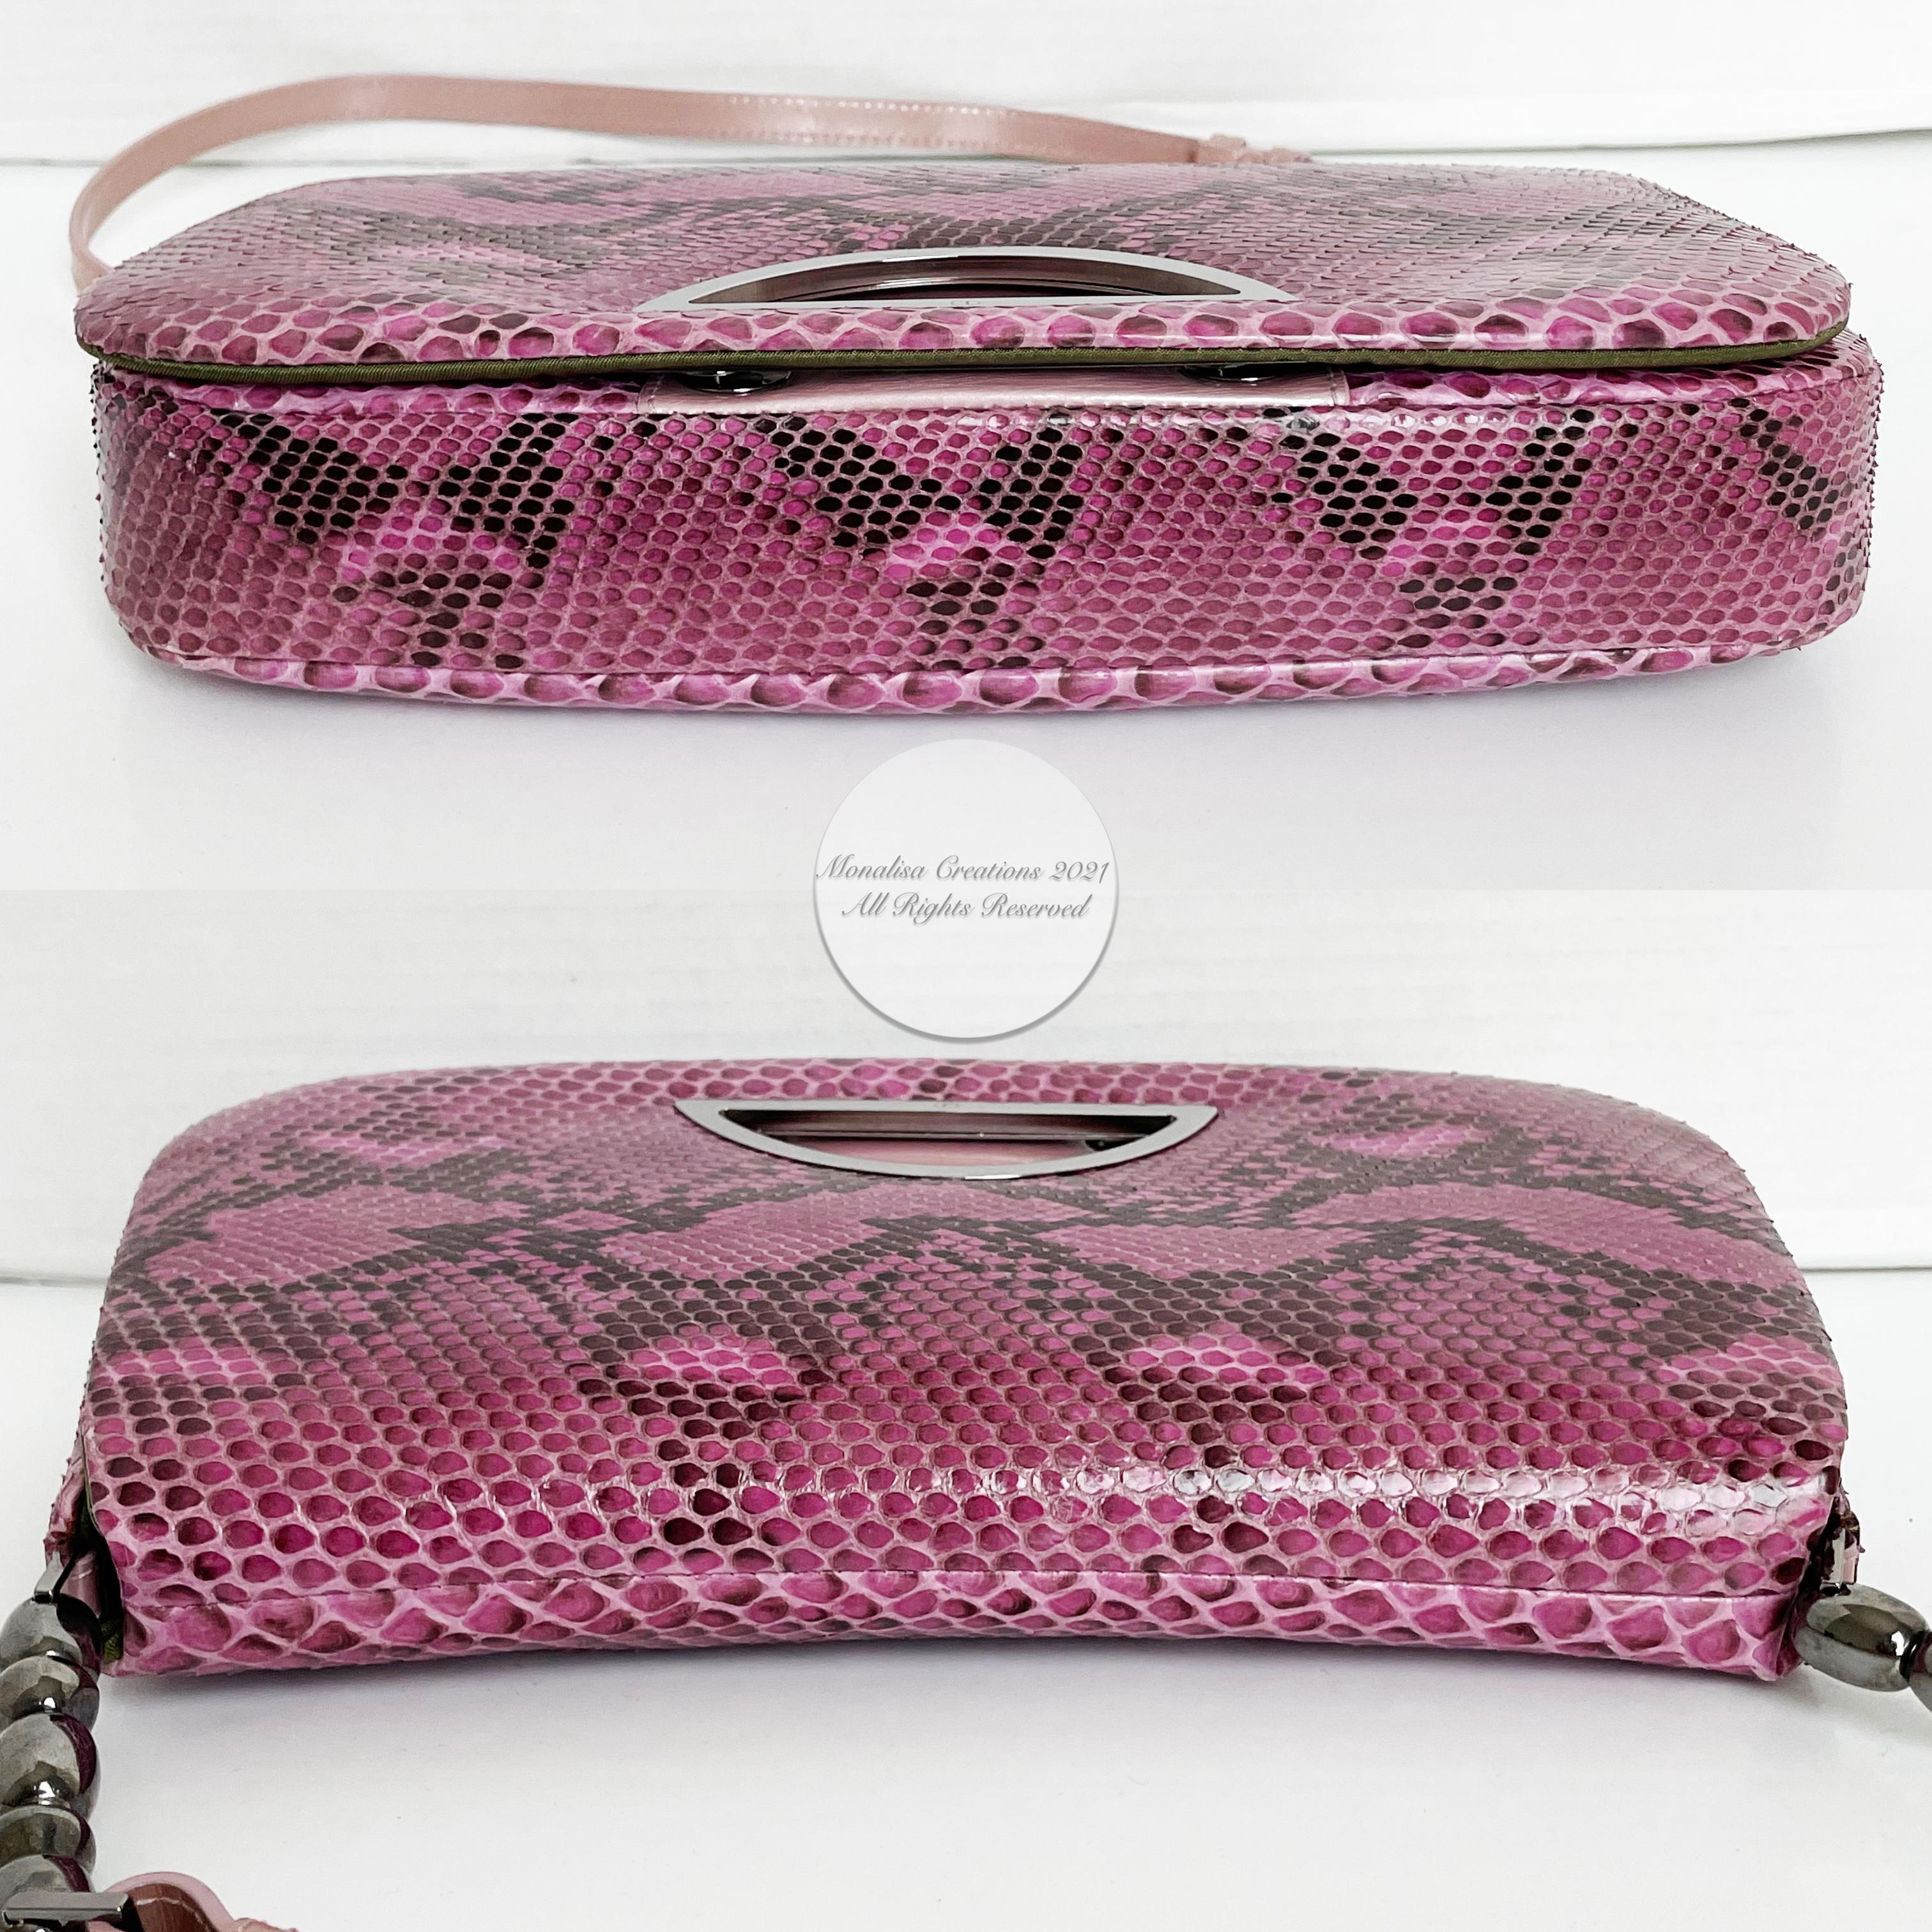 Christian Dior Malice Flap Bag Pink Python Exotic Snakeskin Leather with COA 1